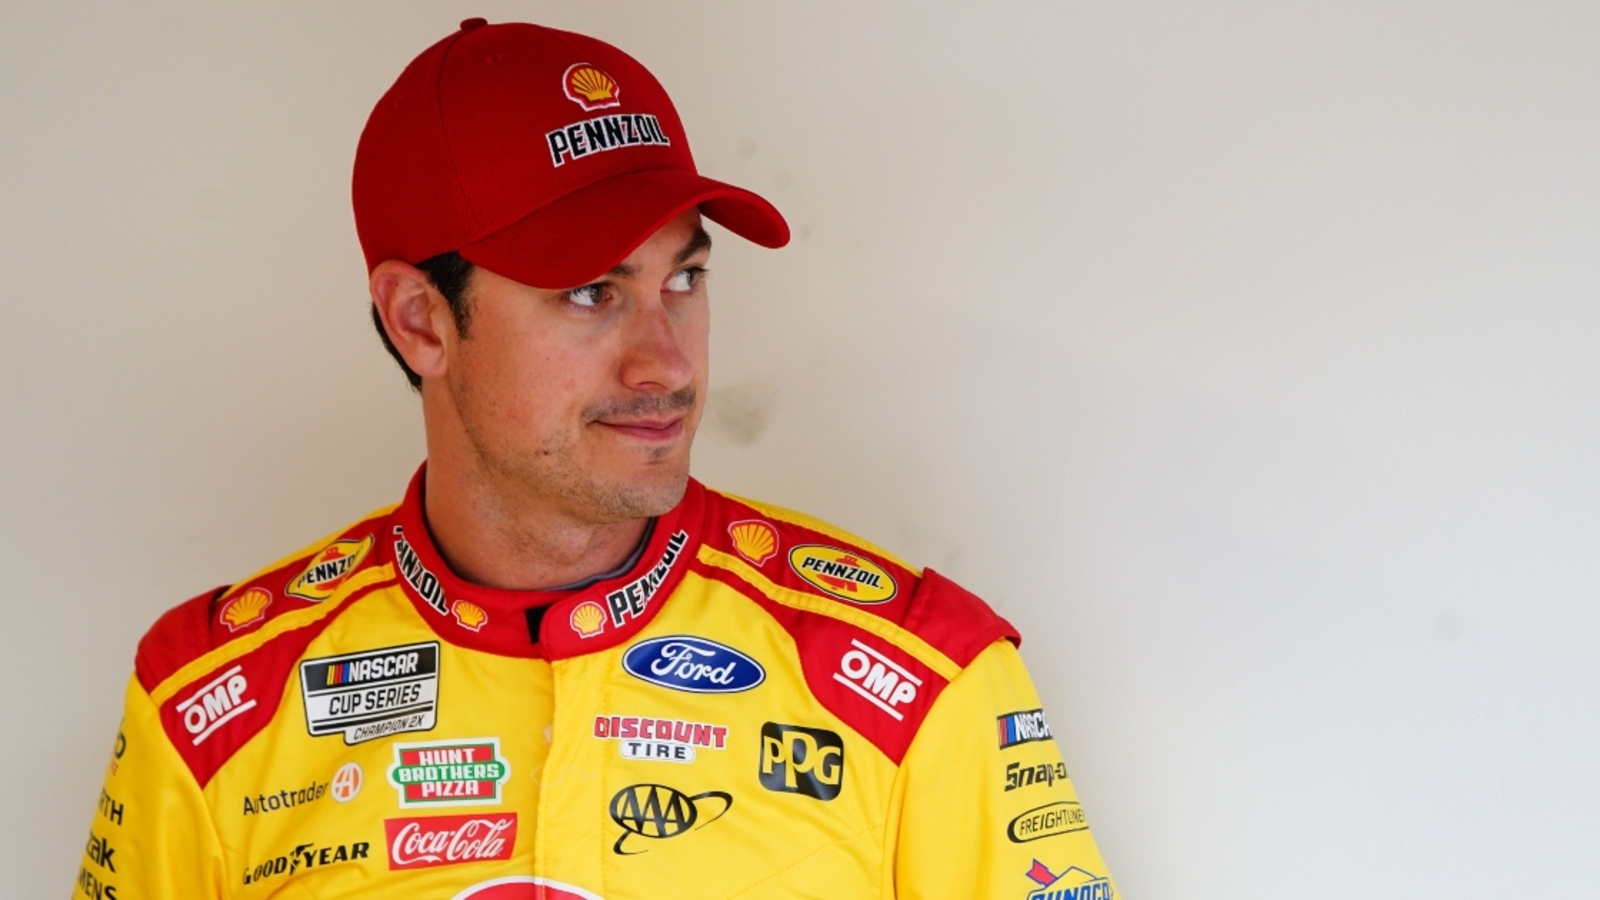 NASCAR’s Elton Sawyer says Joey Logano could face further NASCAR punishment for illegal glove